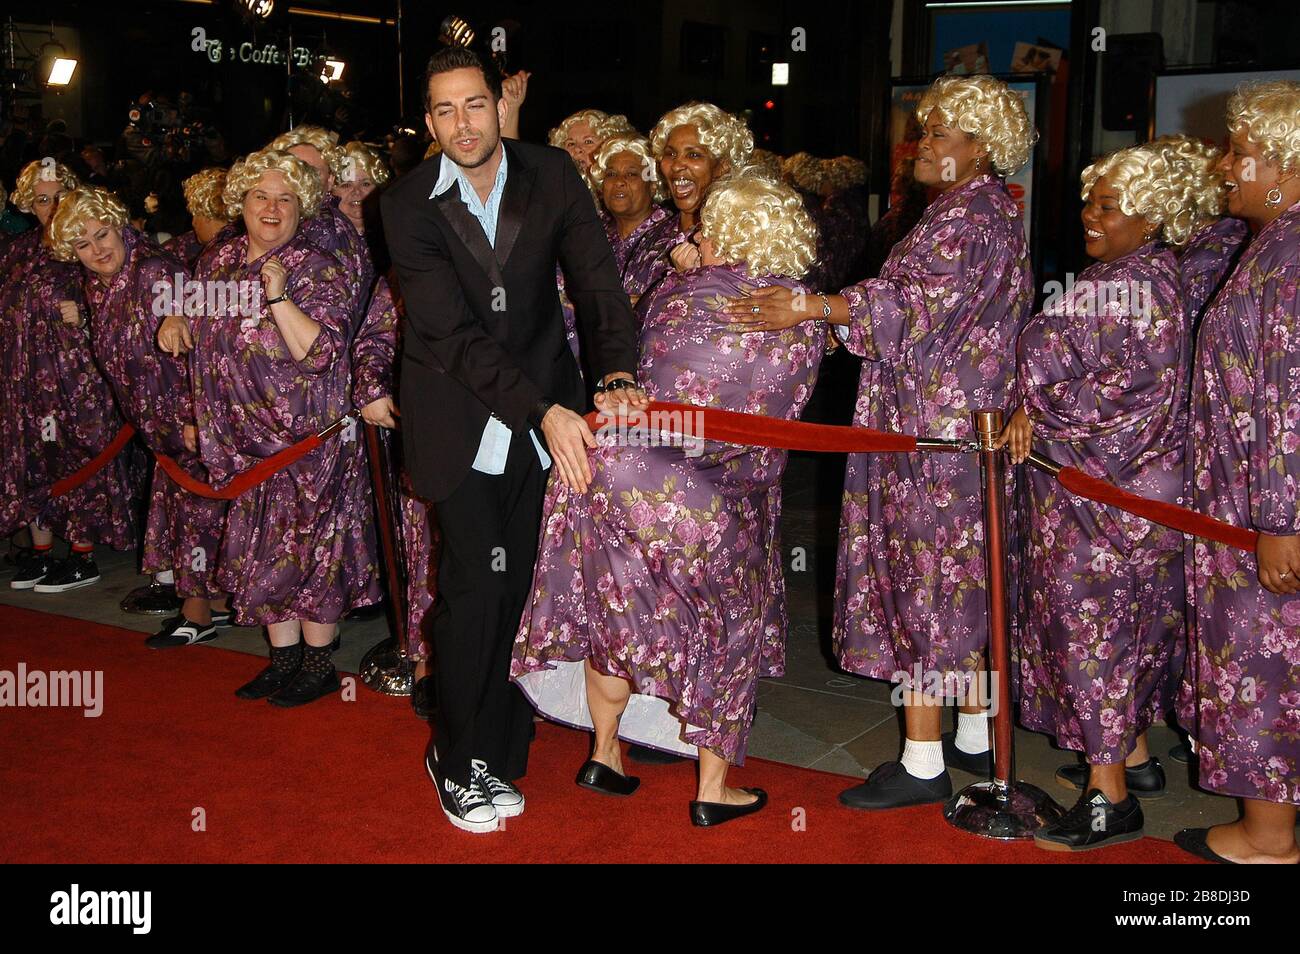 Zachary Levi smacking the behind of a Big Momma at the World Premiere of 